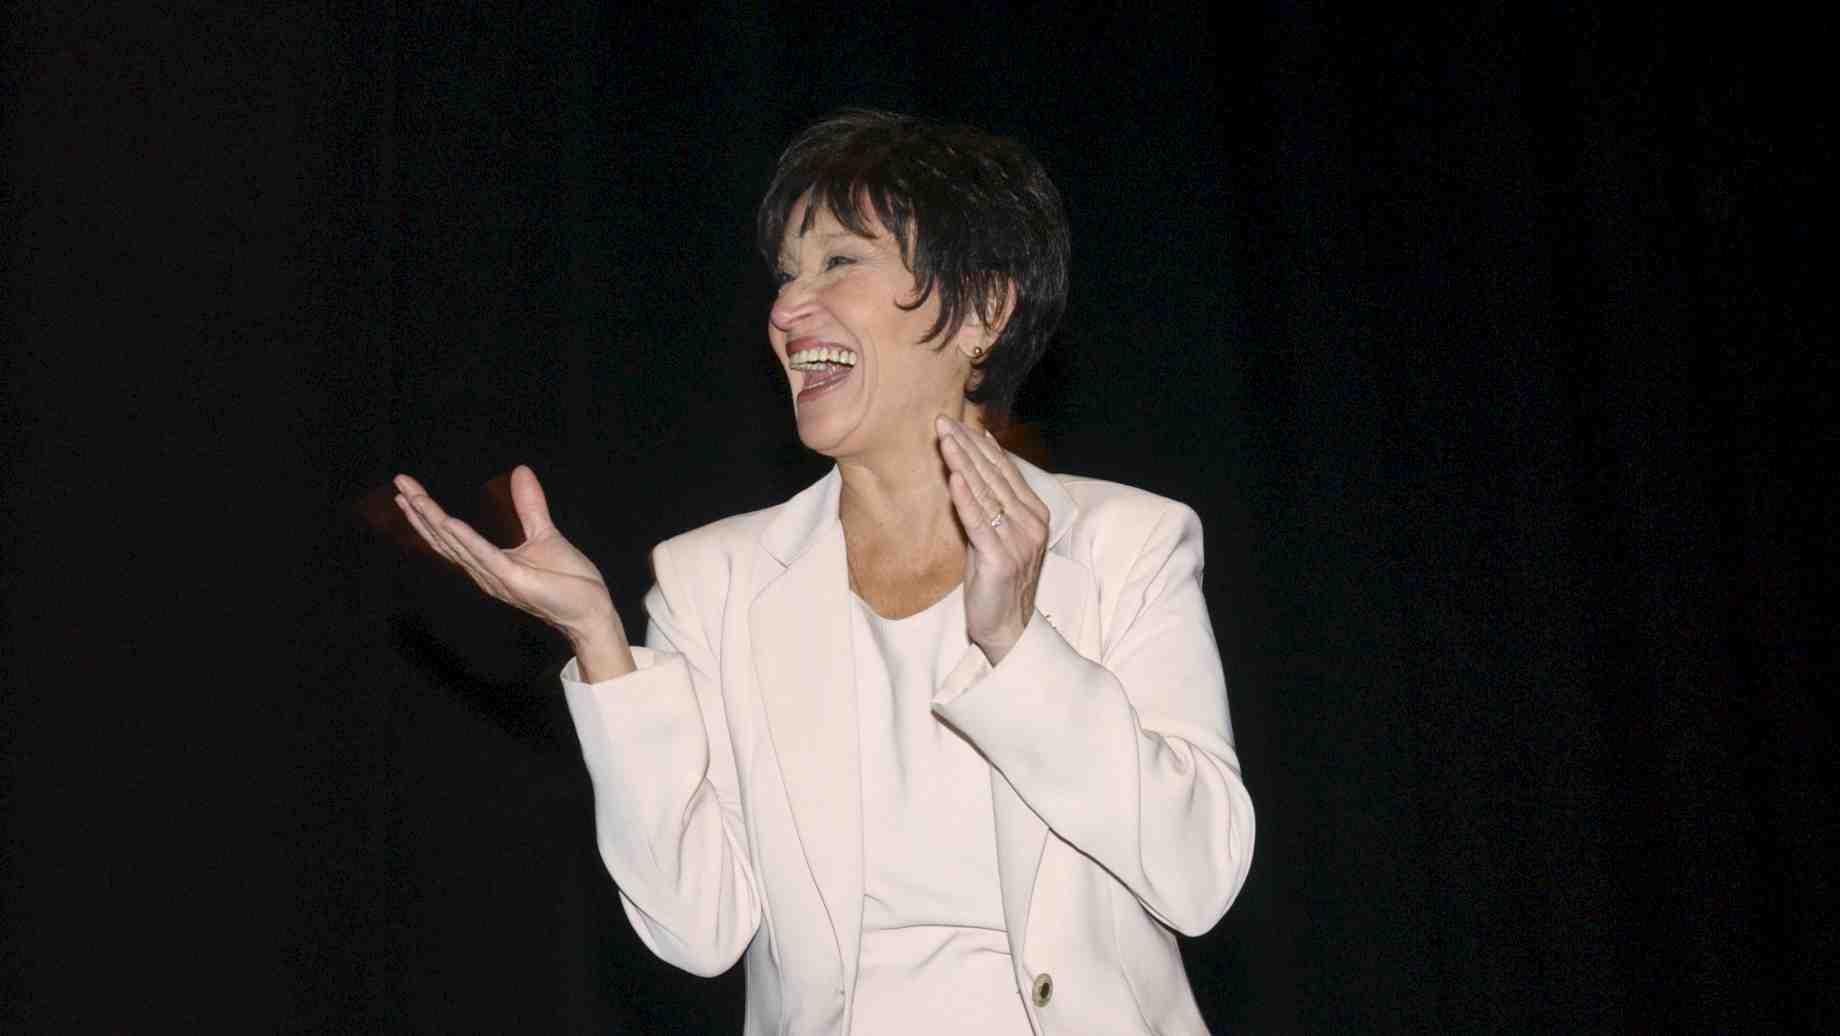 Chita Rivera talks to students during the Master Class